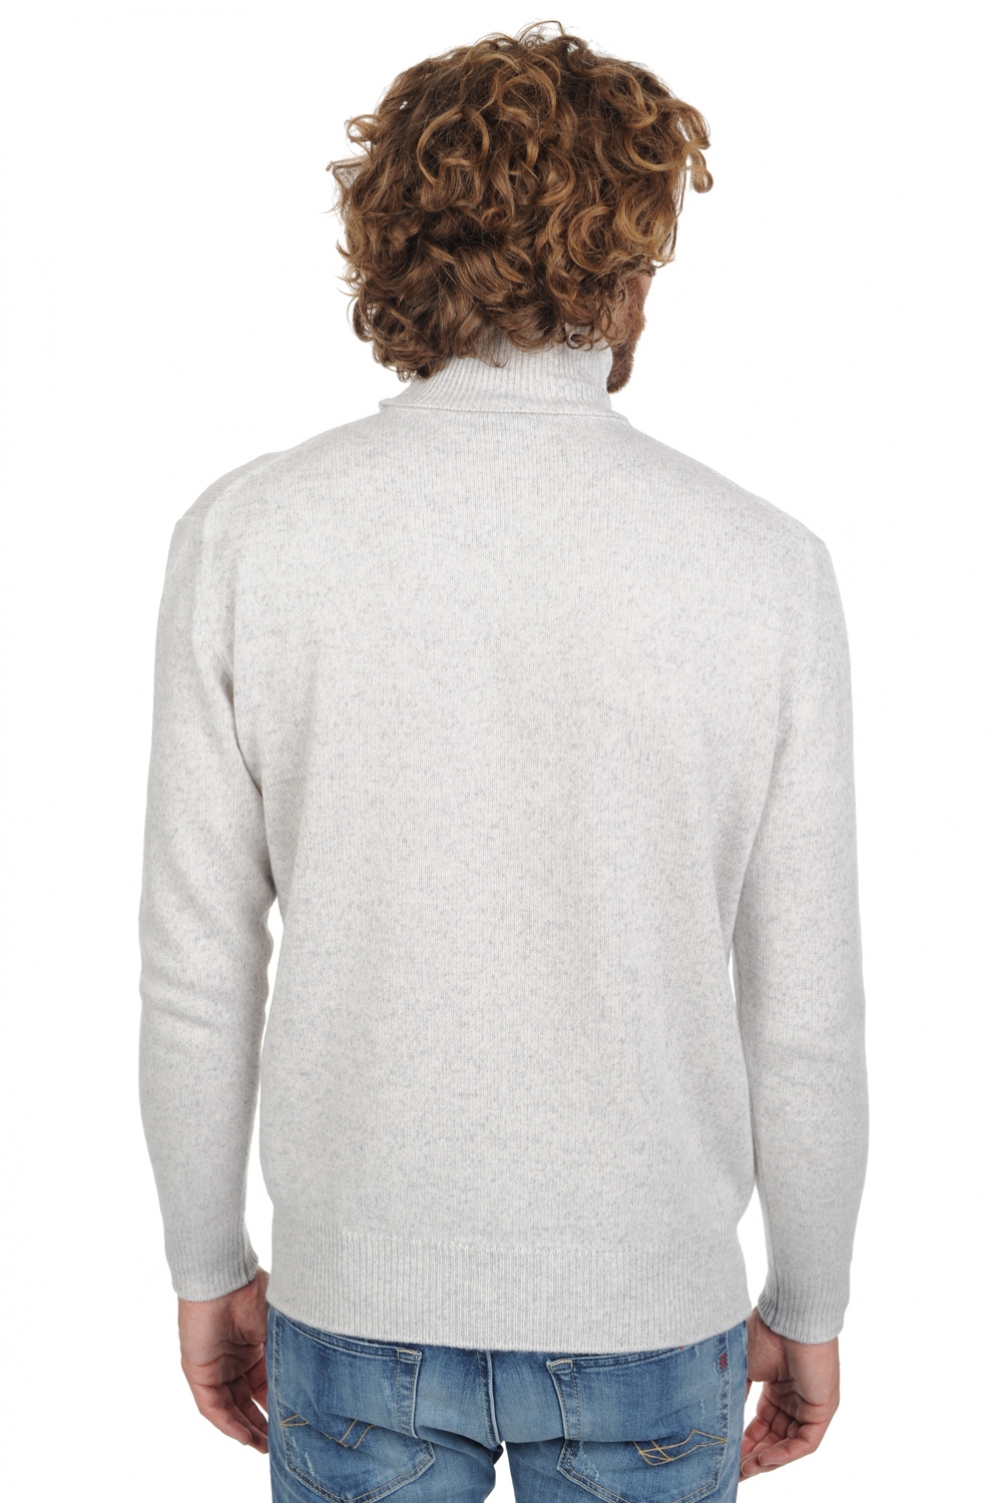 Cachemire pull homme col roule robb galet m